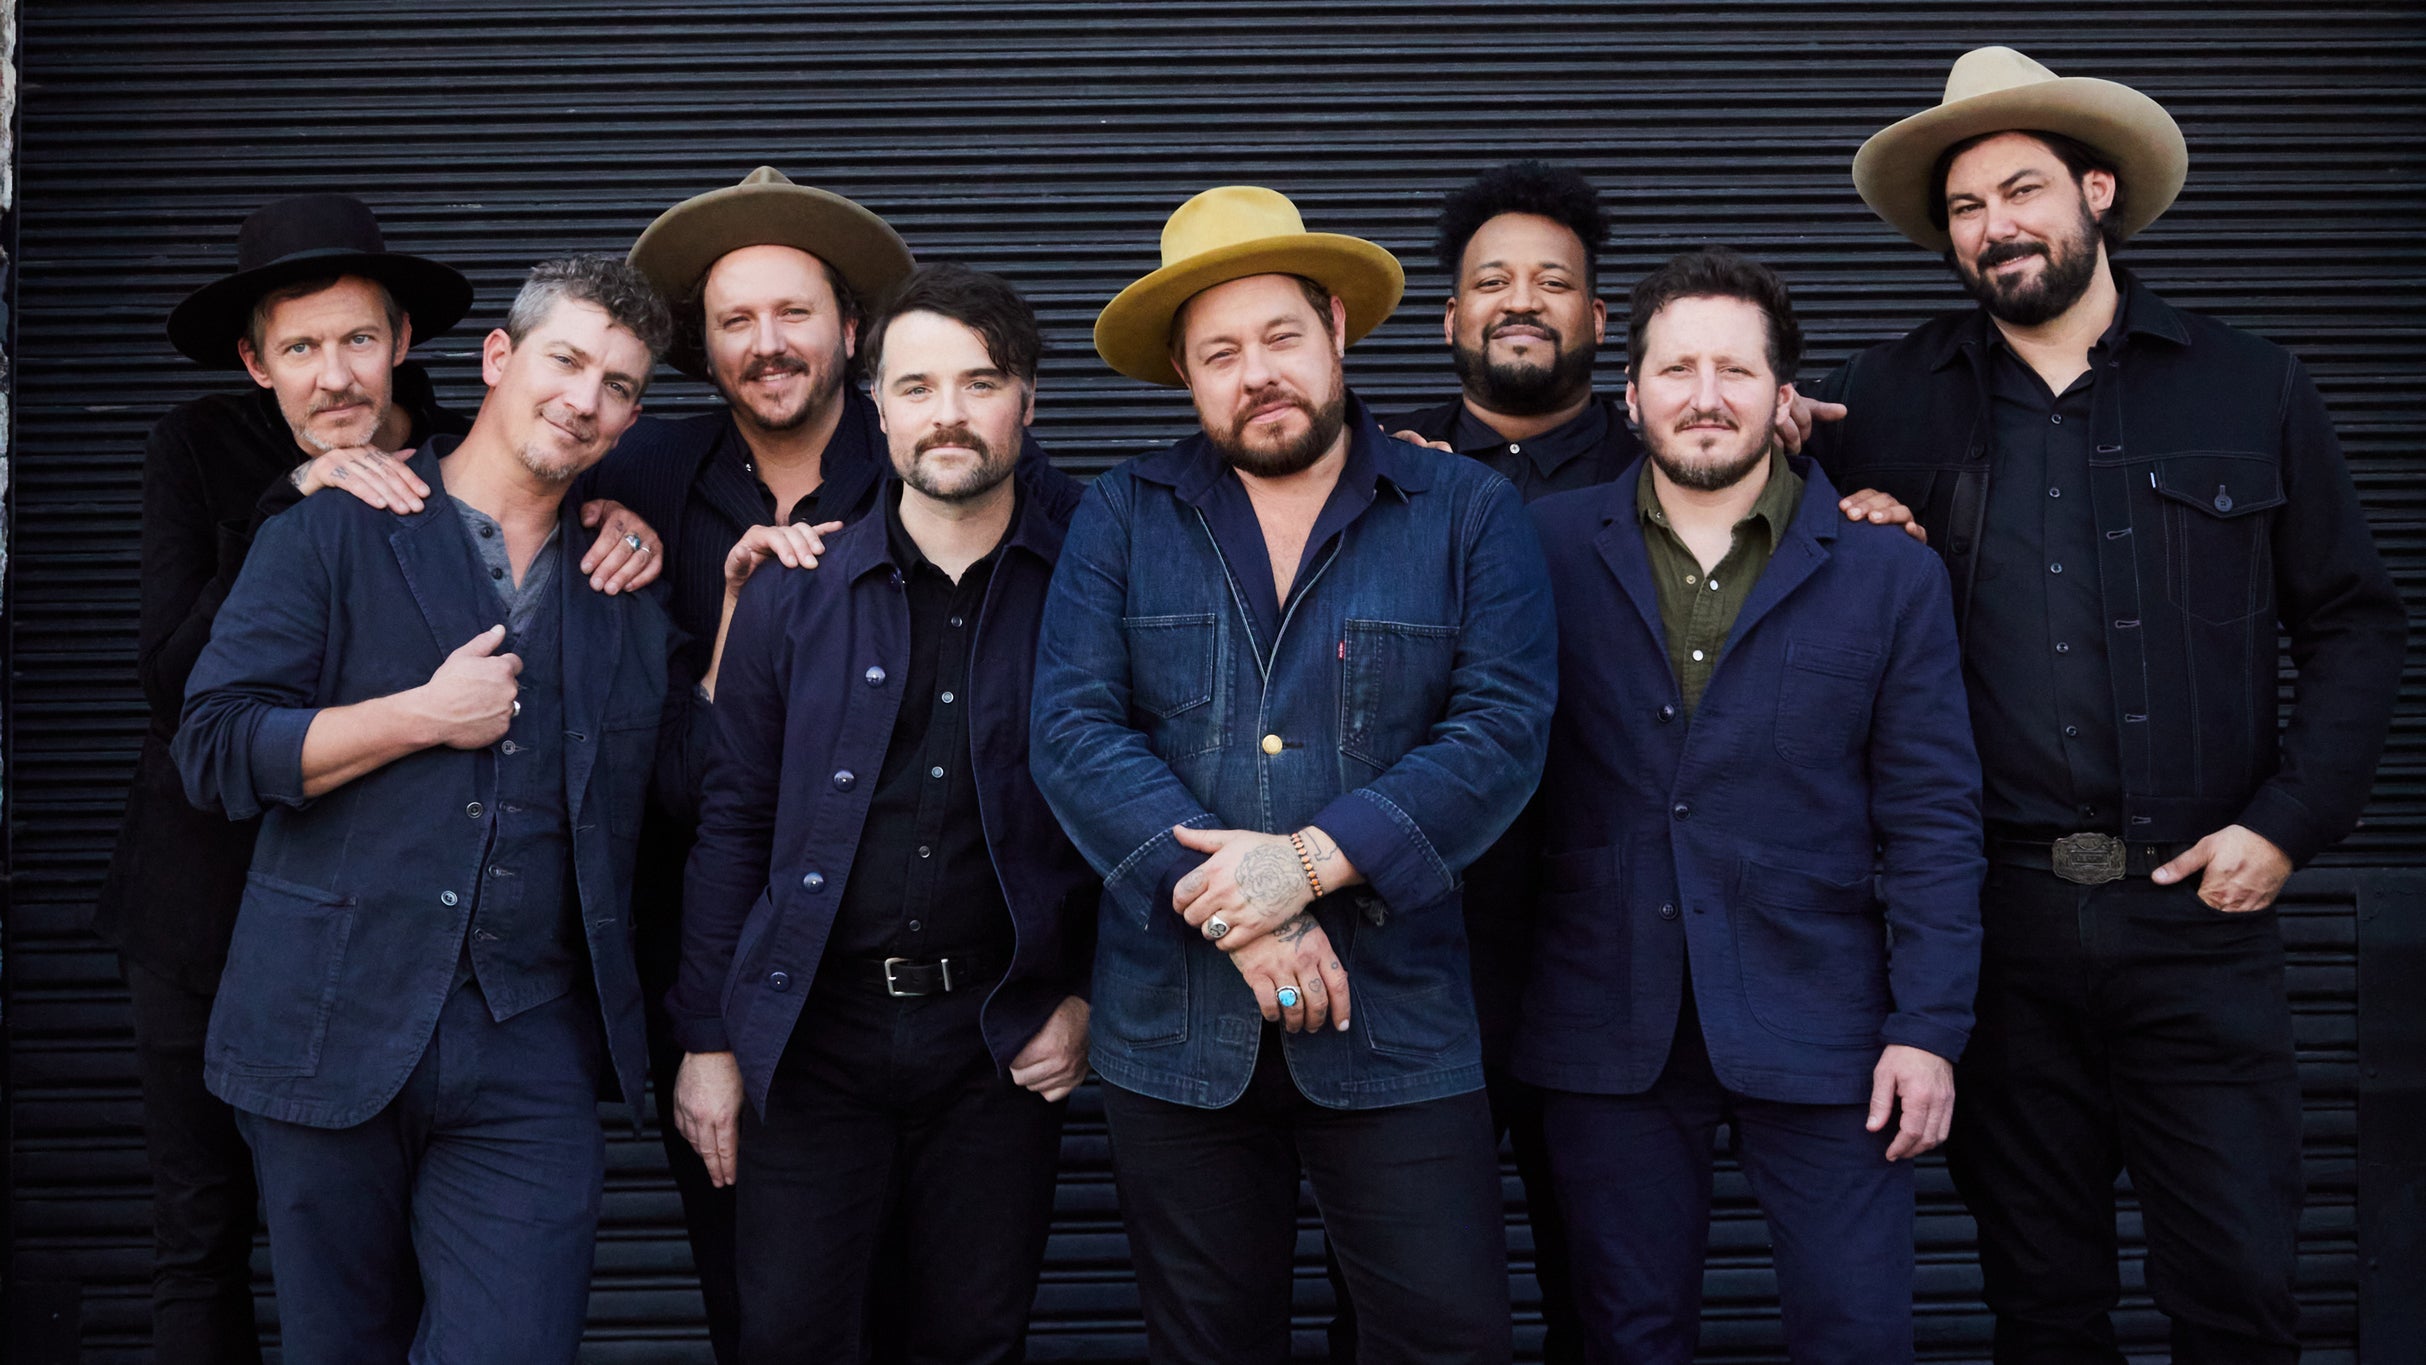 Eye To Eye Tour - Nathaniel Rateliff & TNS and My Morning Jacket presale code for real tickets in Charlotte